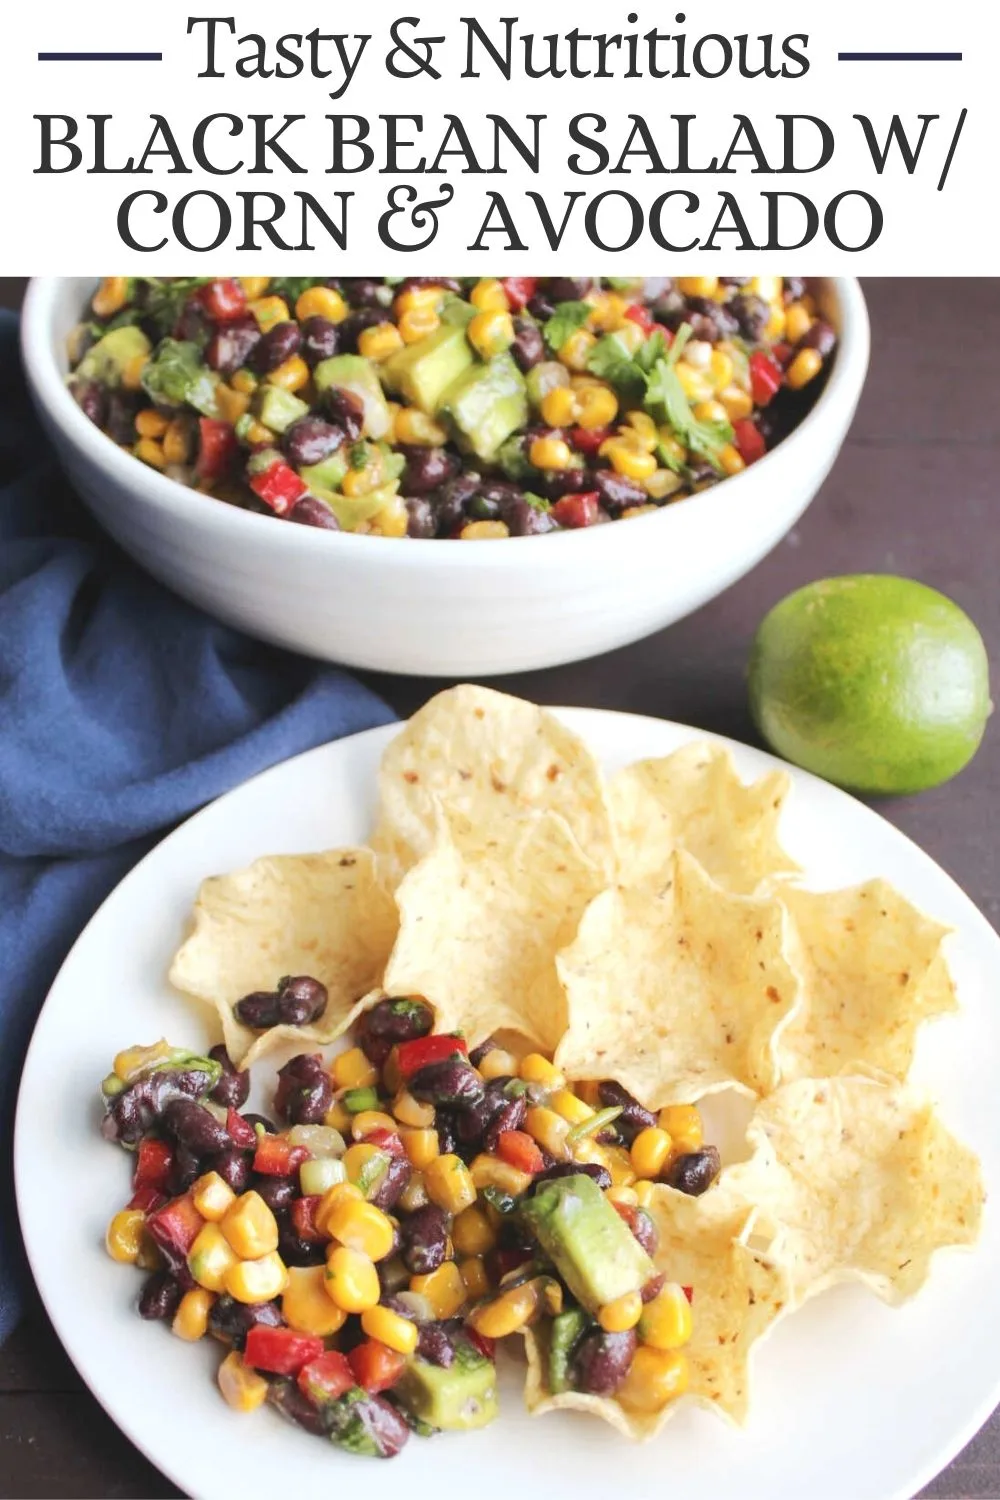 Corn, black bean and avocado salad is the perfect side dish for all of your Mexican favorites. It is so fall of flavor, nutrients and yumminess. It’s also a great dip with tortilla chips!